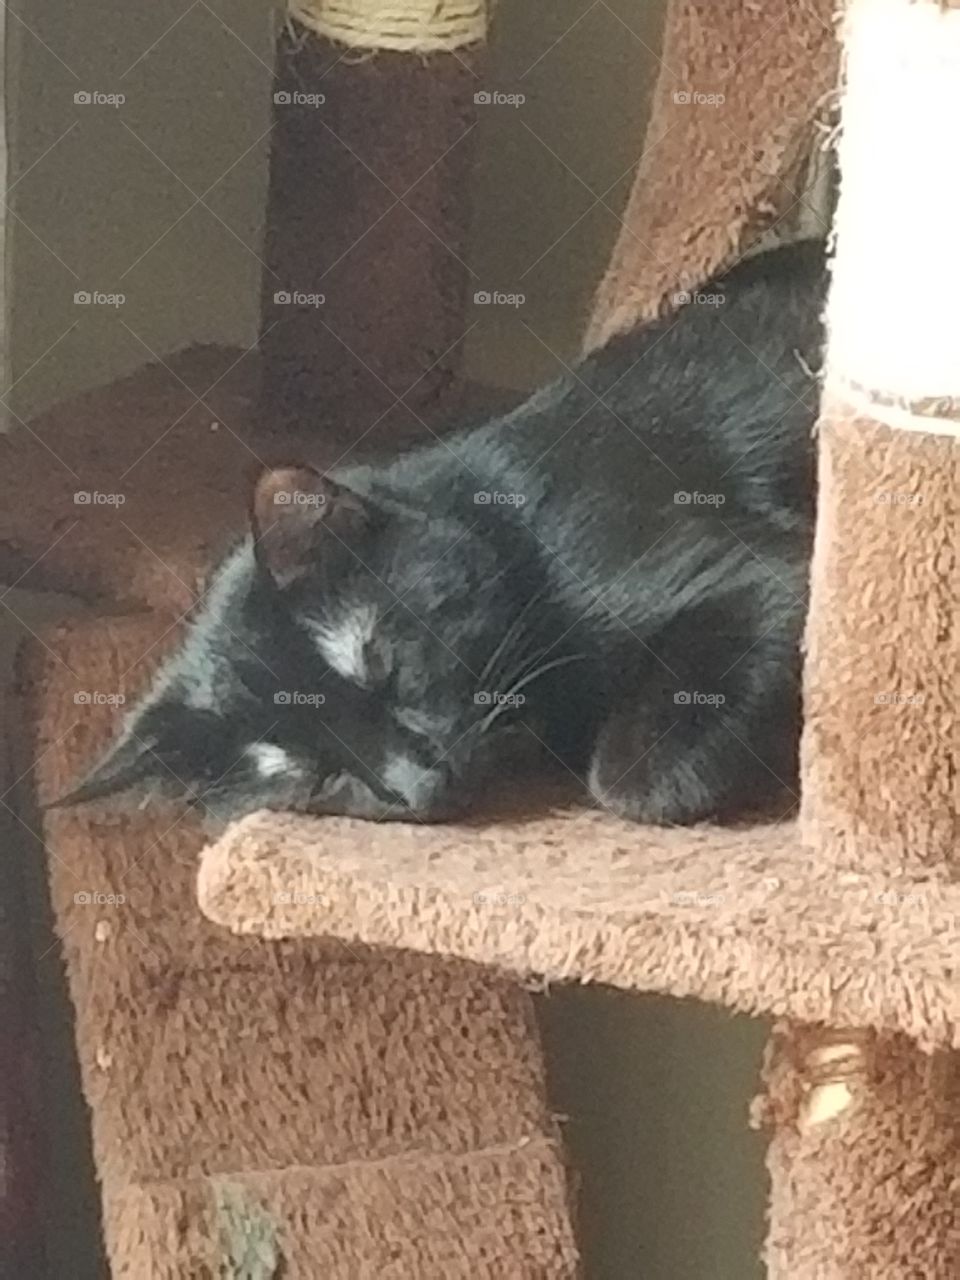 adorable cat sleeping peacefully